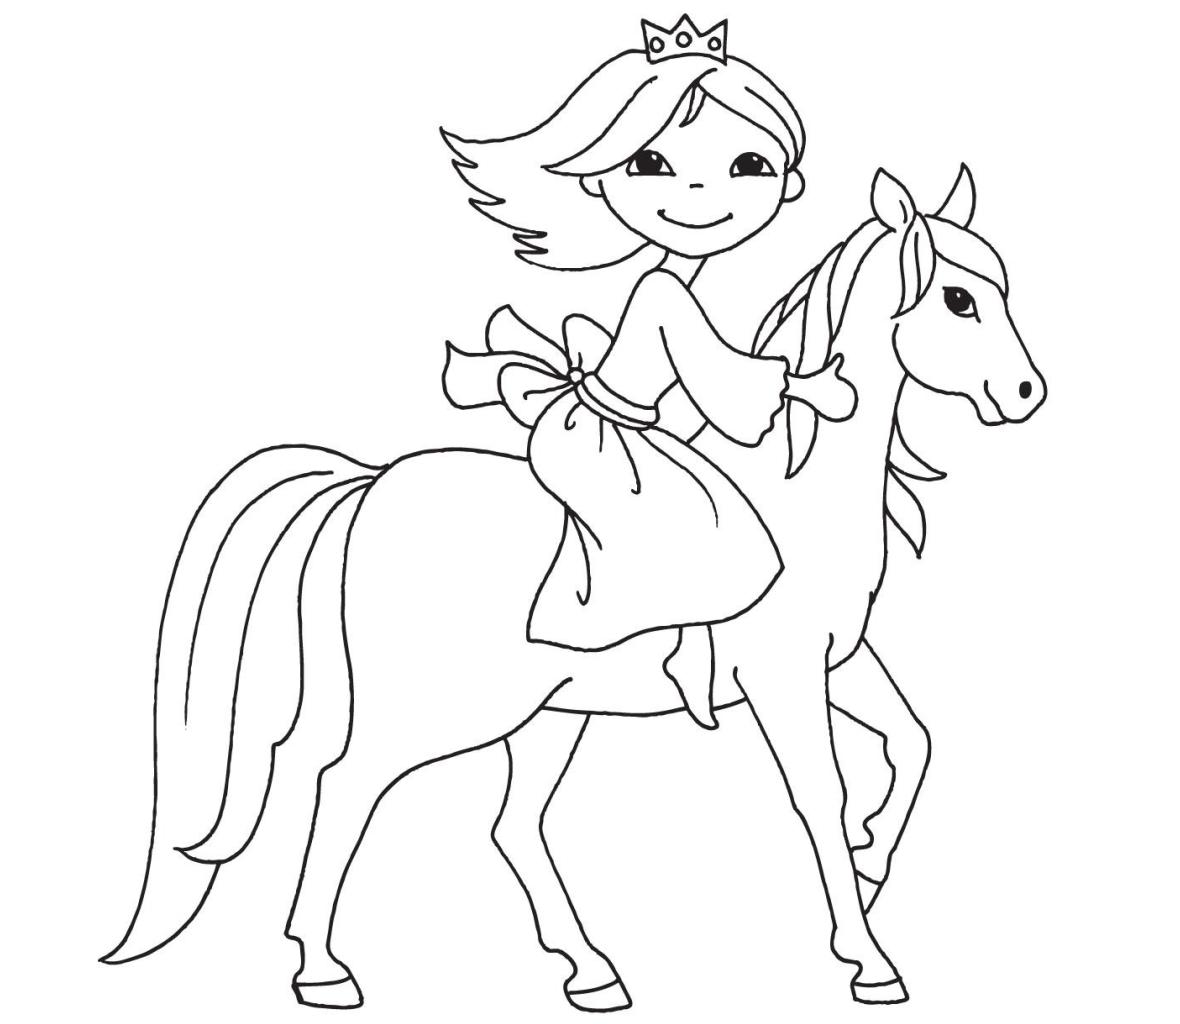 Princess on horseback to be colored